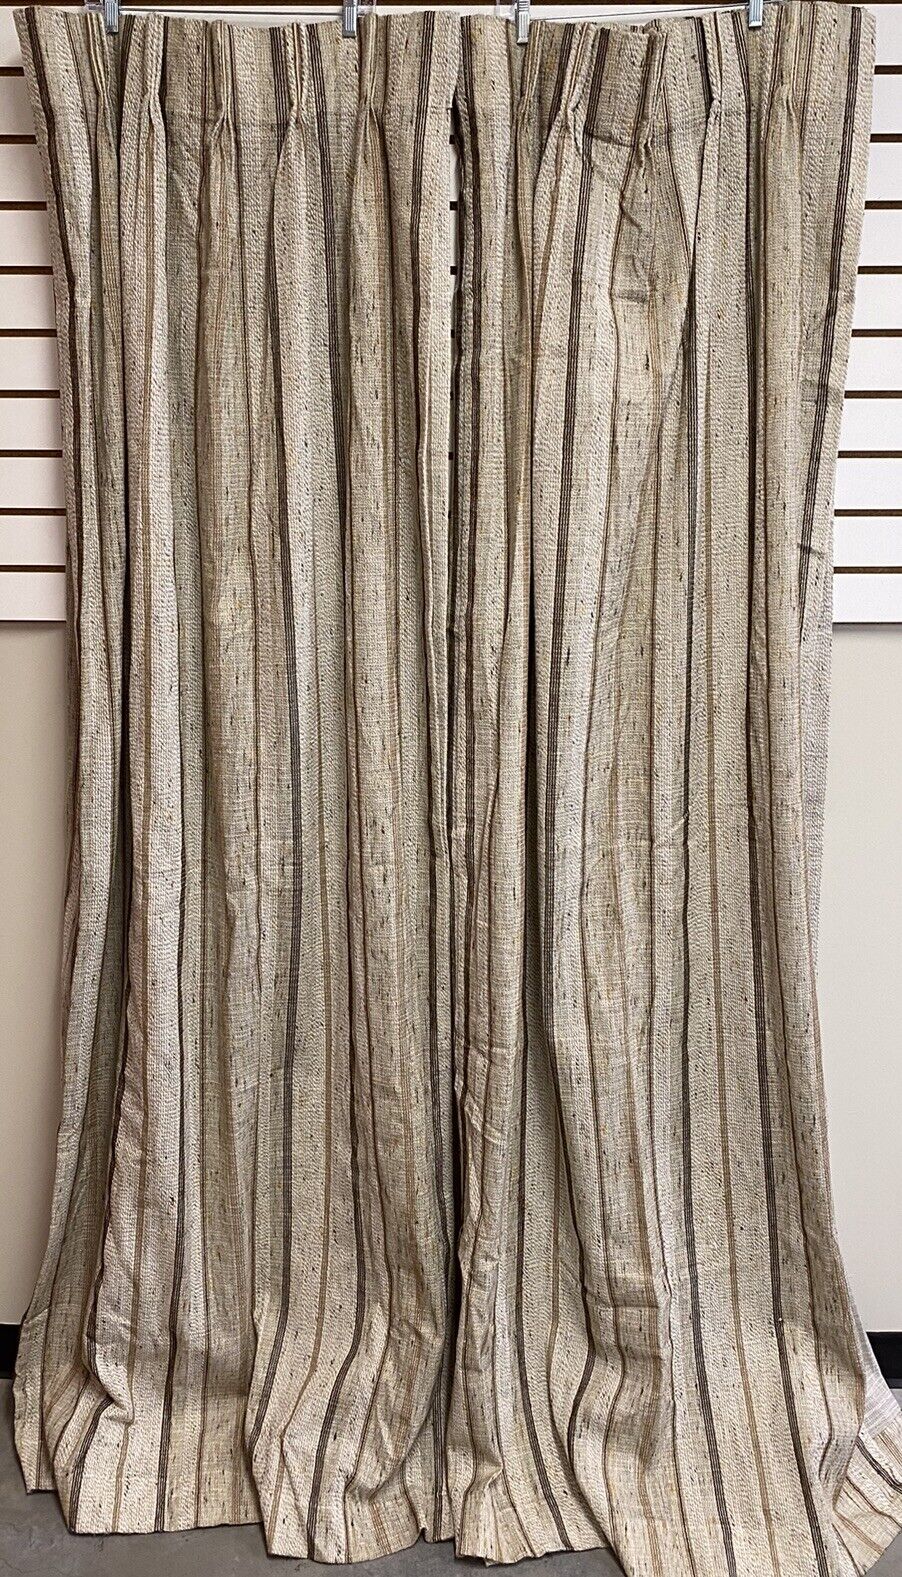 Set of 2 Vintage Pinch Pleat Woven Textured MCM Curtain Panels 48 x 83 Tan/Brown